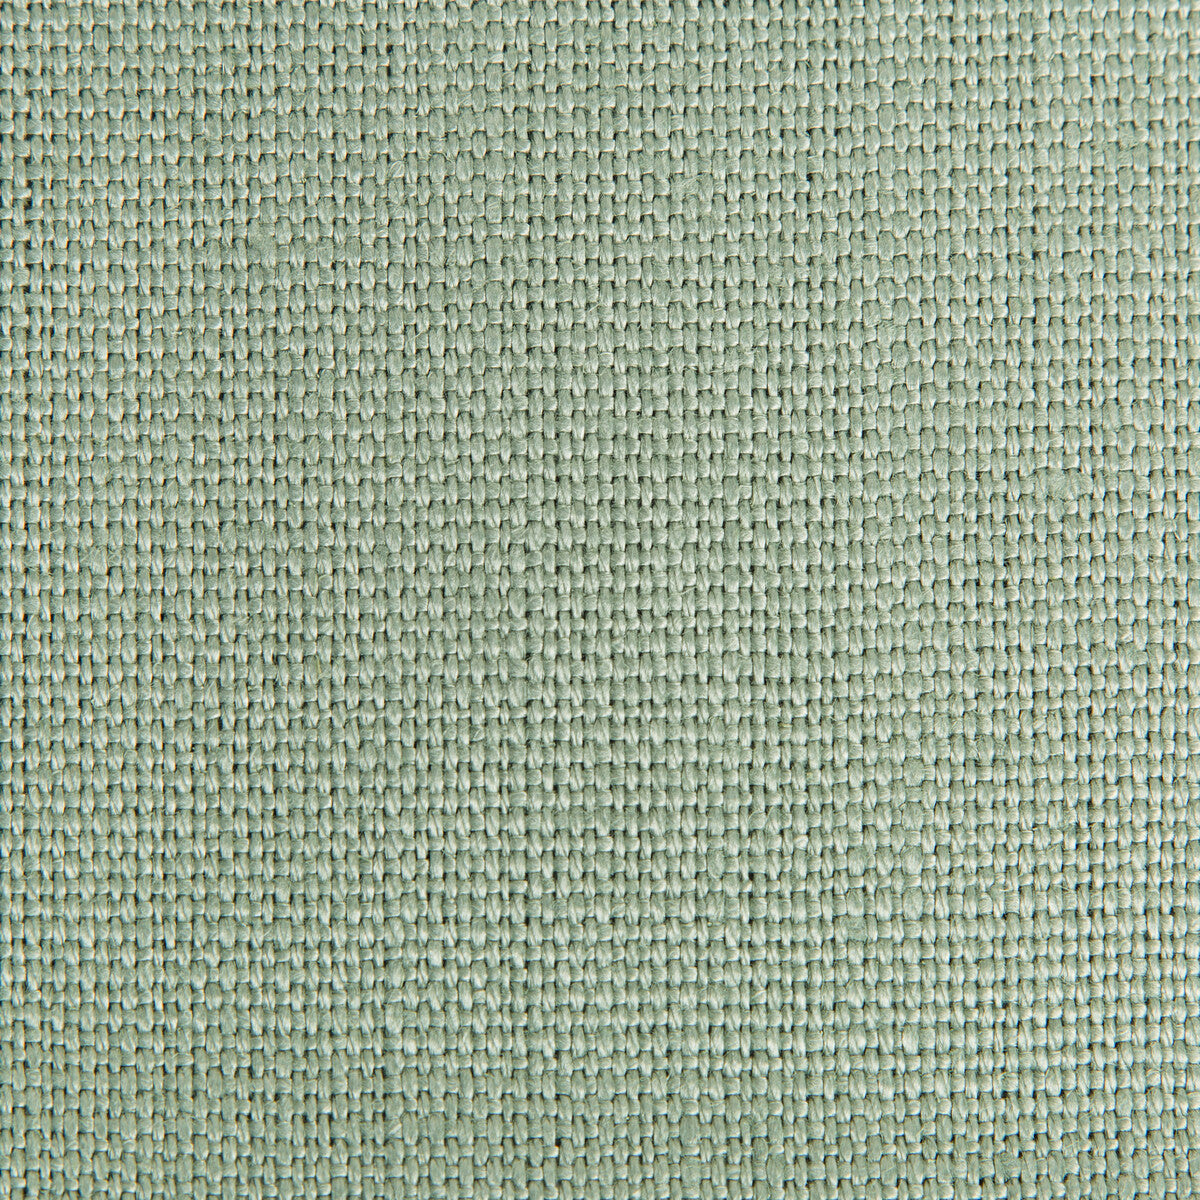 Siddeley fabric in ocean color - pattern 32005.15.0 - by Kravet Design in the Candice Olson collection